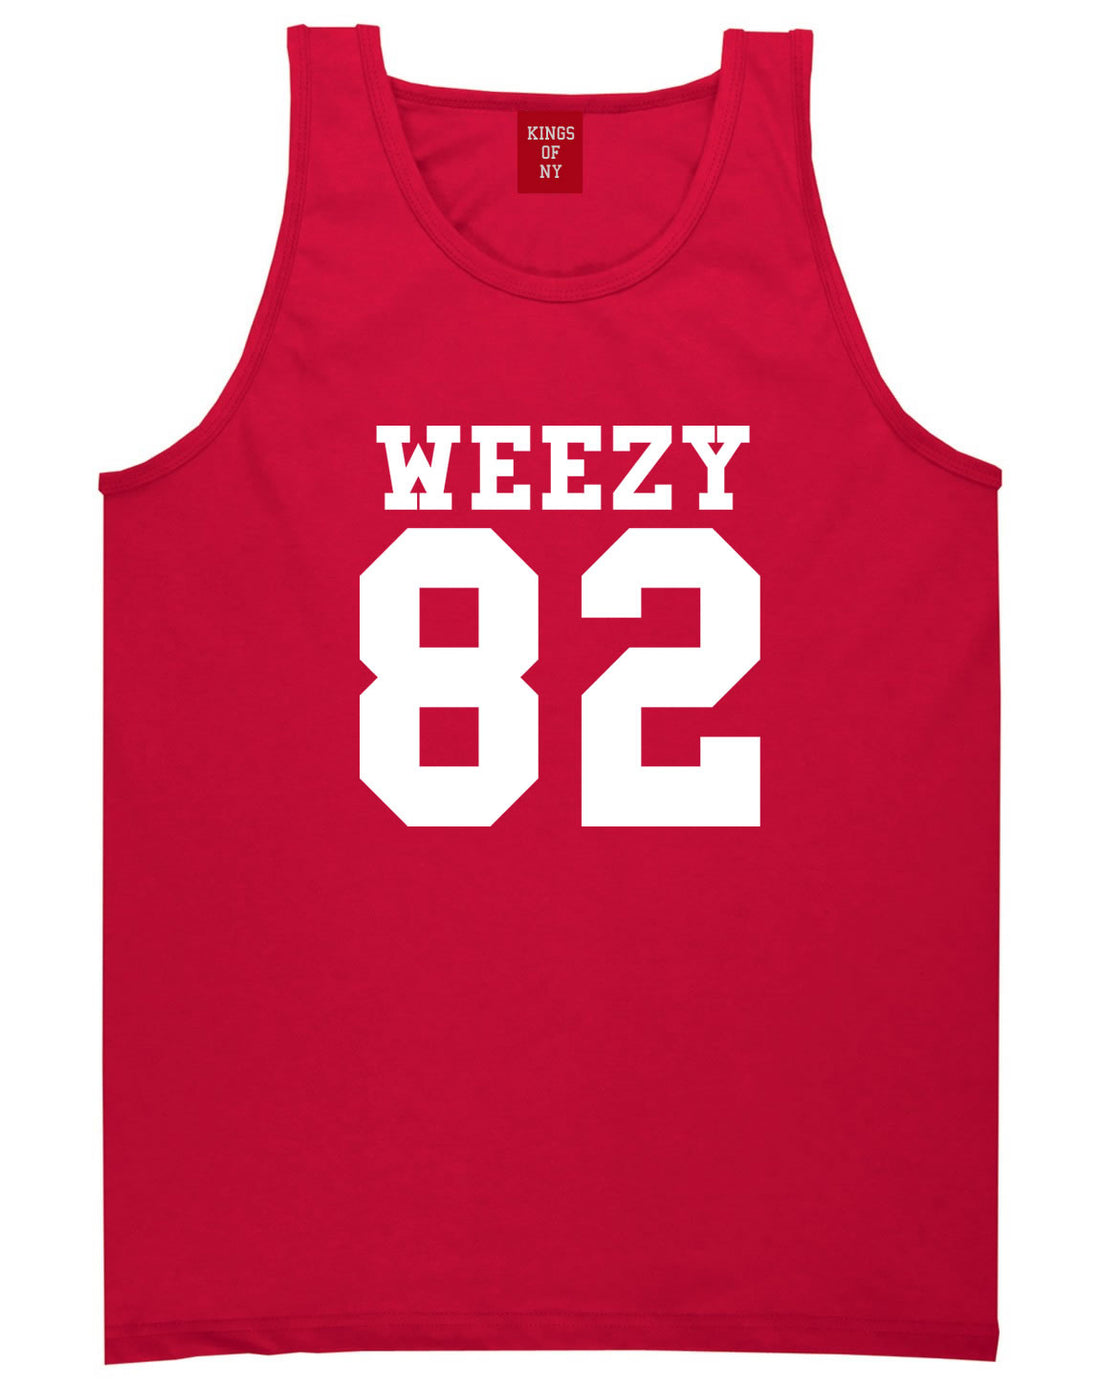 Weezy 82 Team Tank Top in Red by Kings Of NY